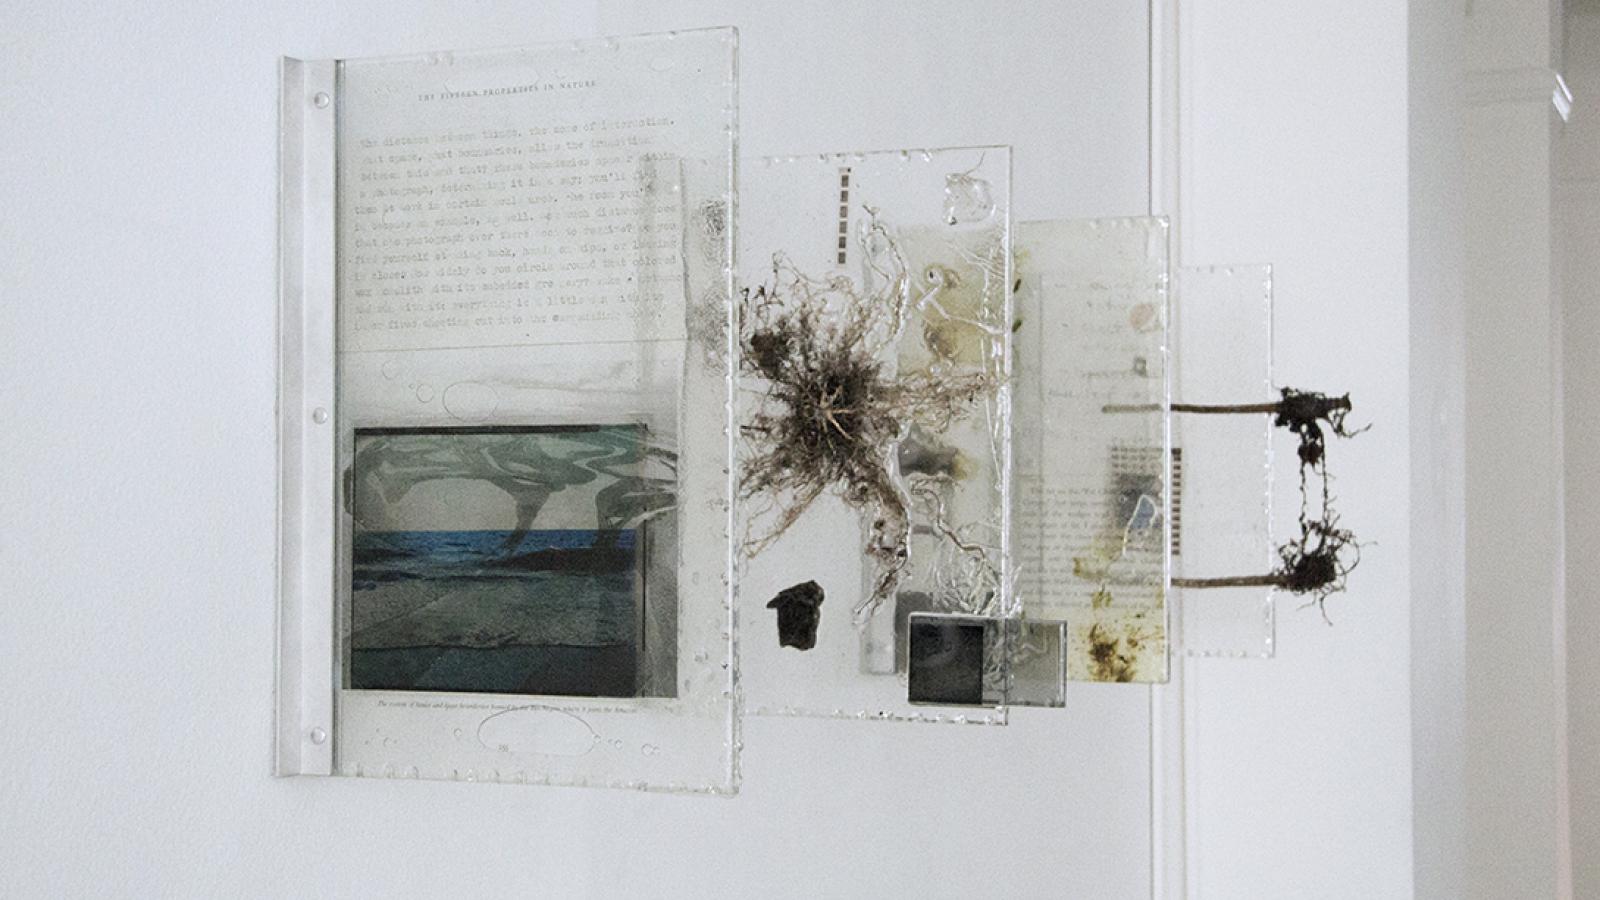 Image of Heidi Norton: "The Distance Between Things," plant, resin, paint, acrylic, celluloid, photographic transparencies, petrified wood, lenses, mirror, 2013